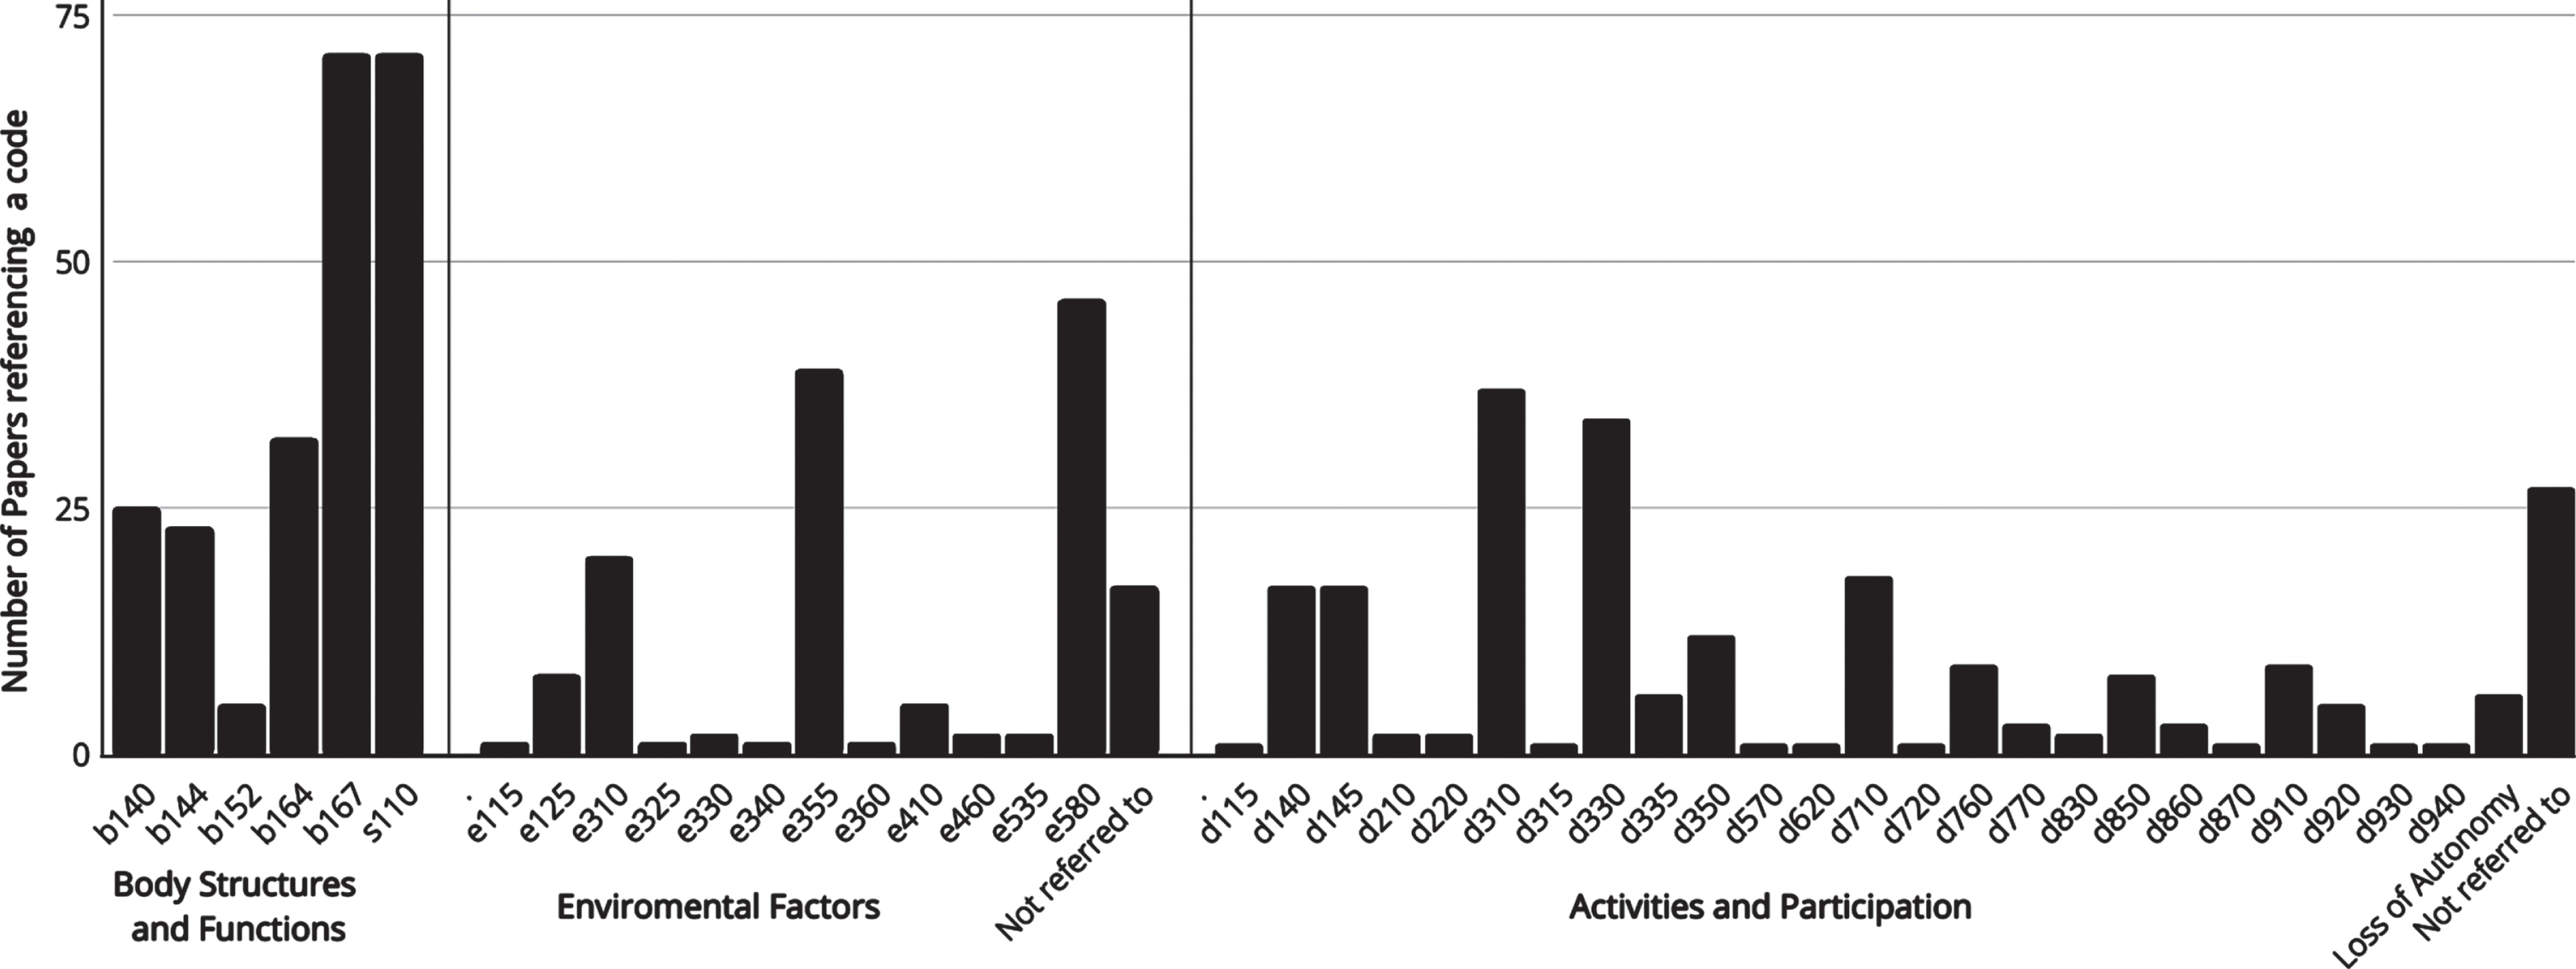 Frequency of ‘International Classification of Functioning, Disability and Health’ codes mentioned or inferred across papers.